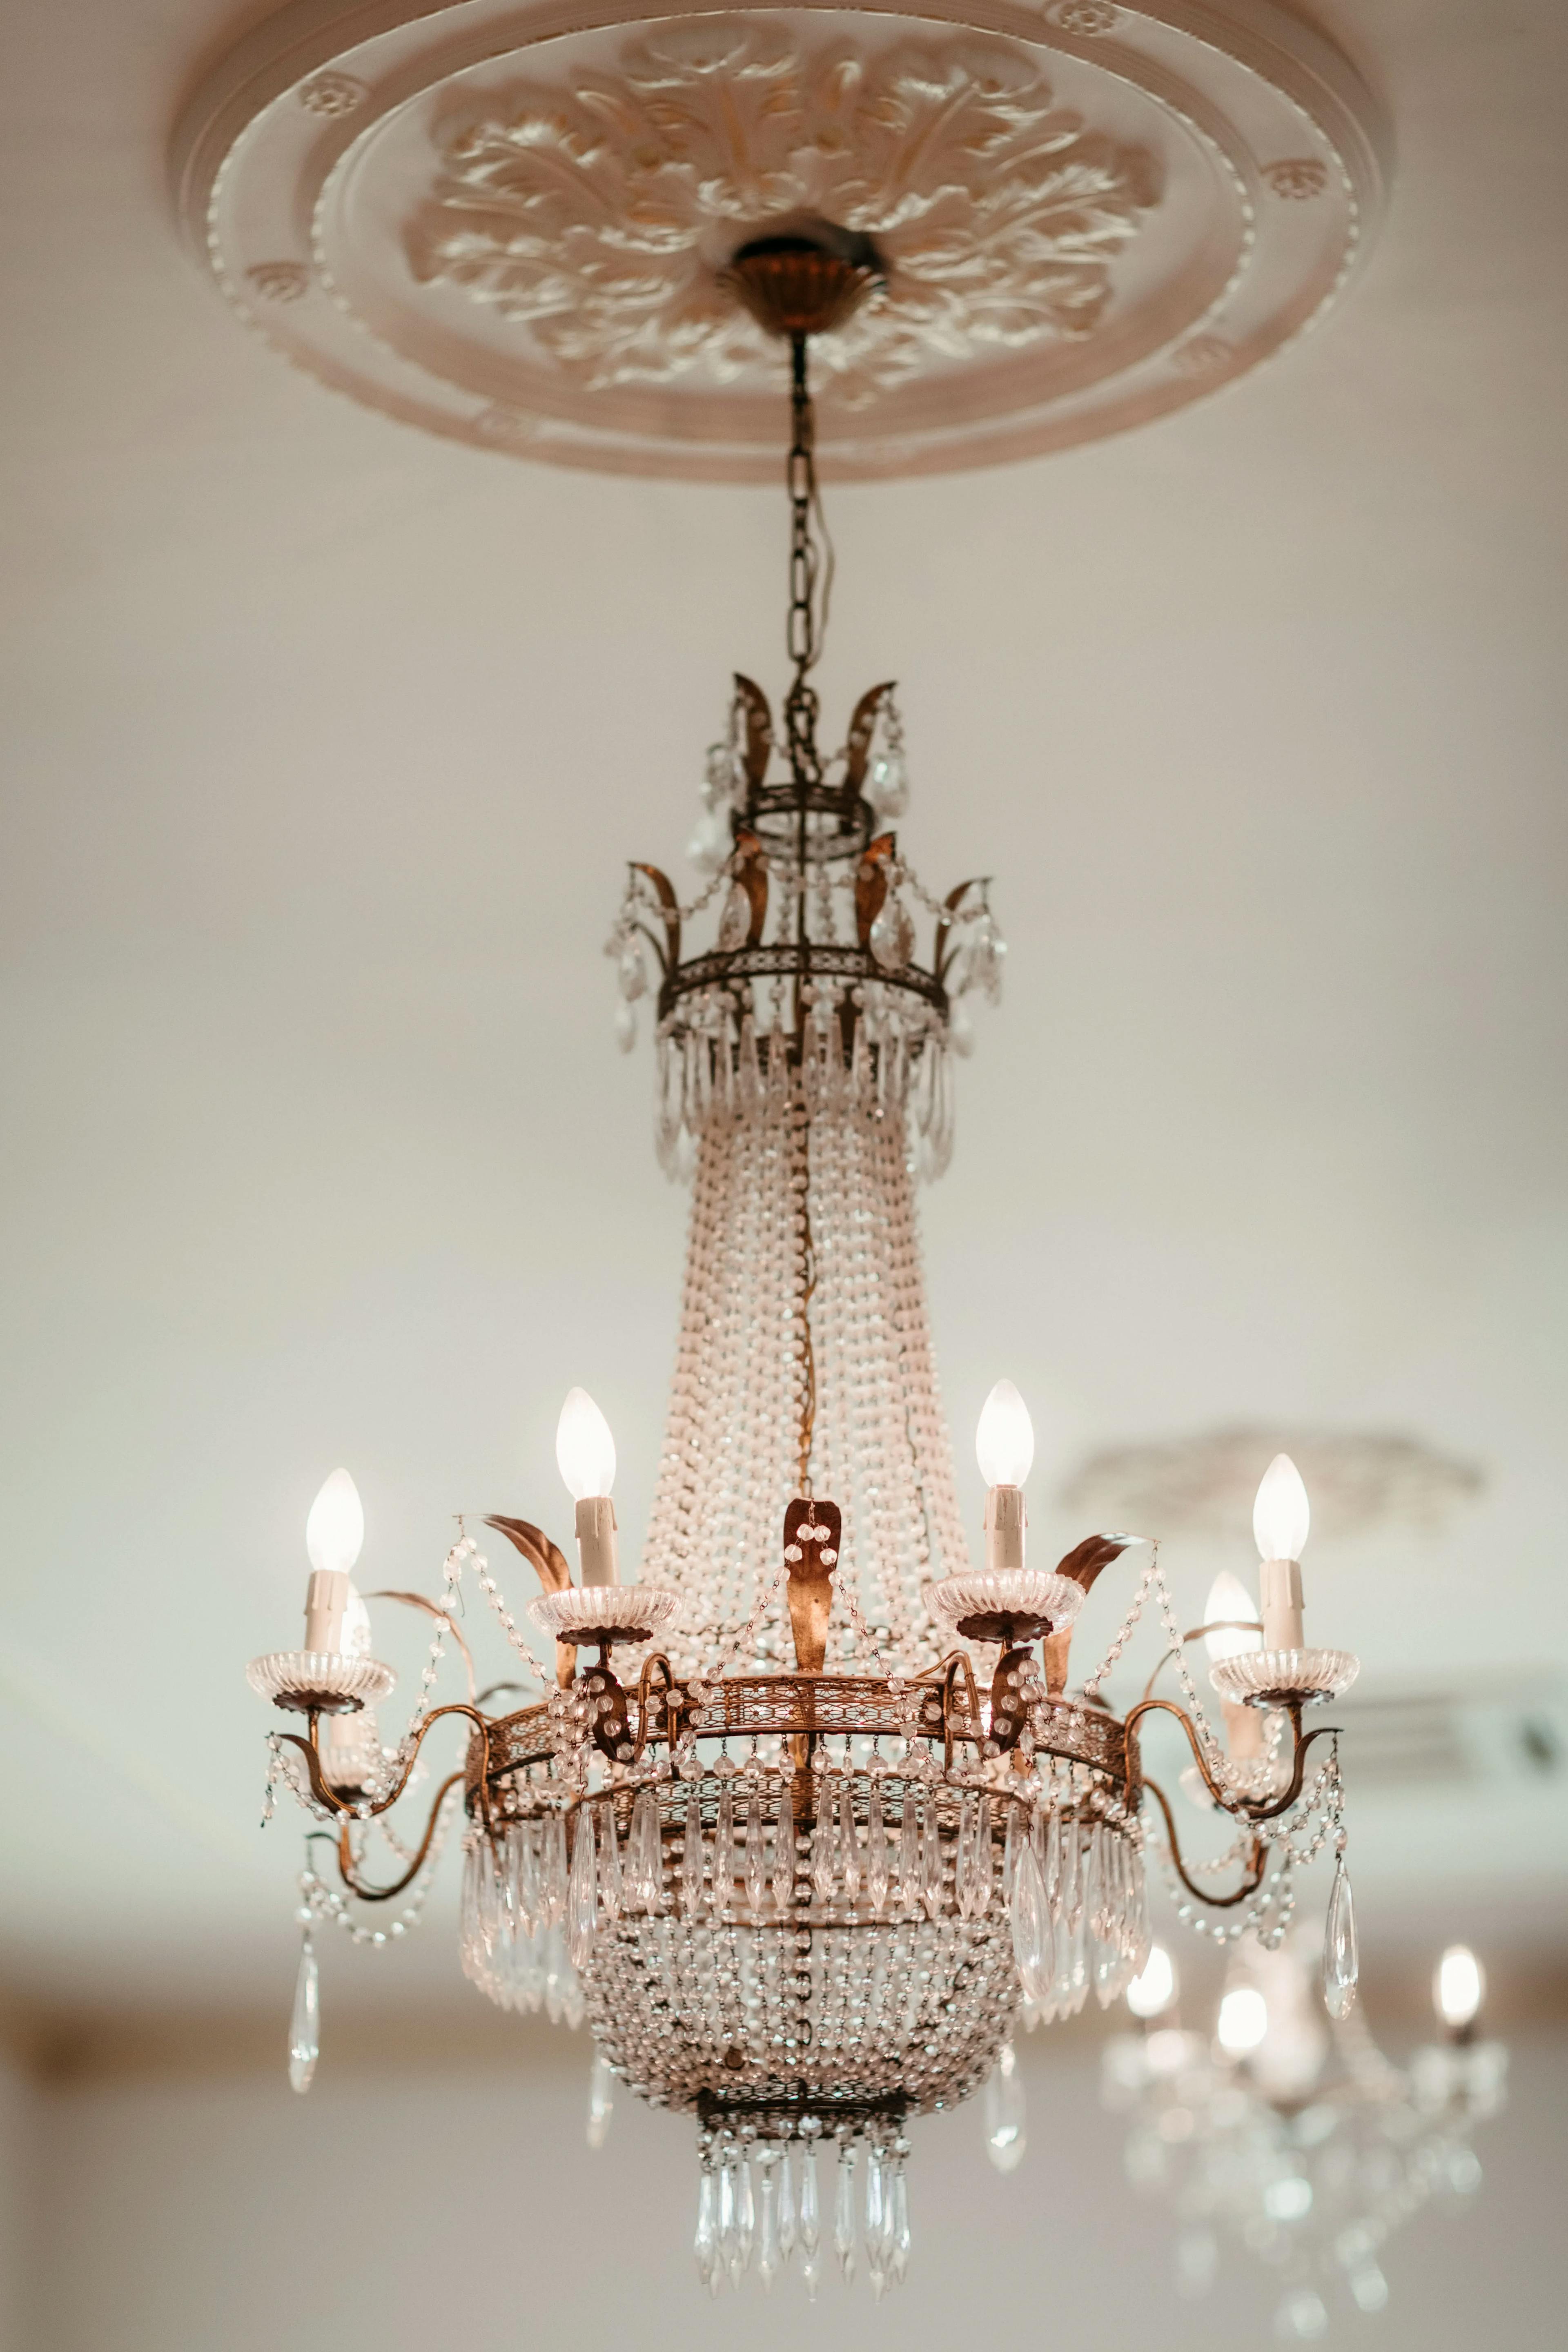 An elegant chandelier with multiple lit candle-like bulbs and hanging crystal ornaments is suspended from an ornate ceiling medallion in a well-lit room.